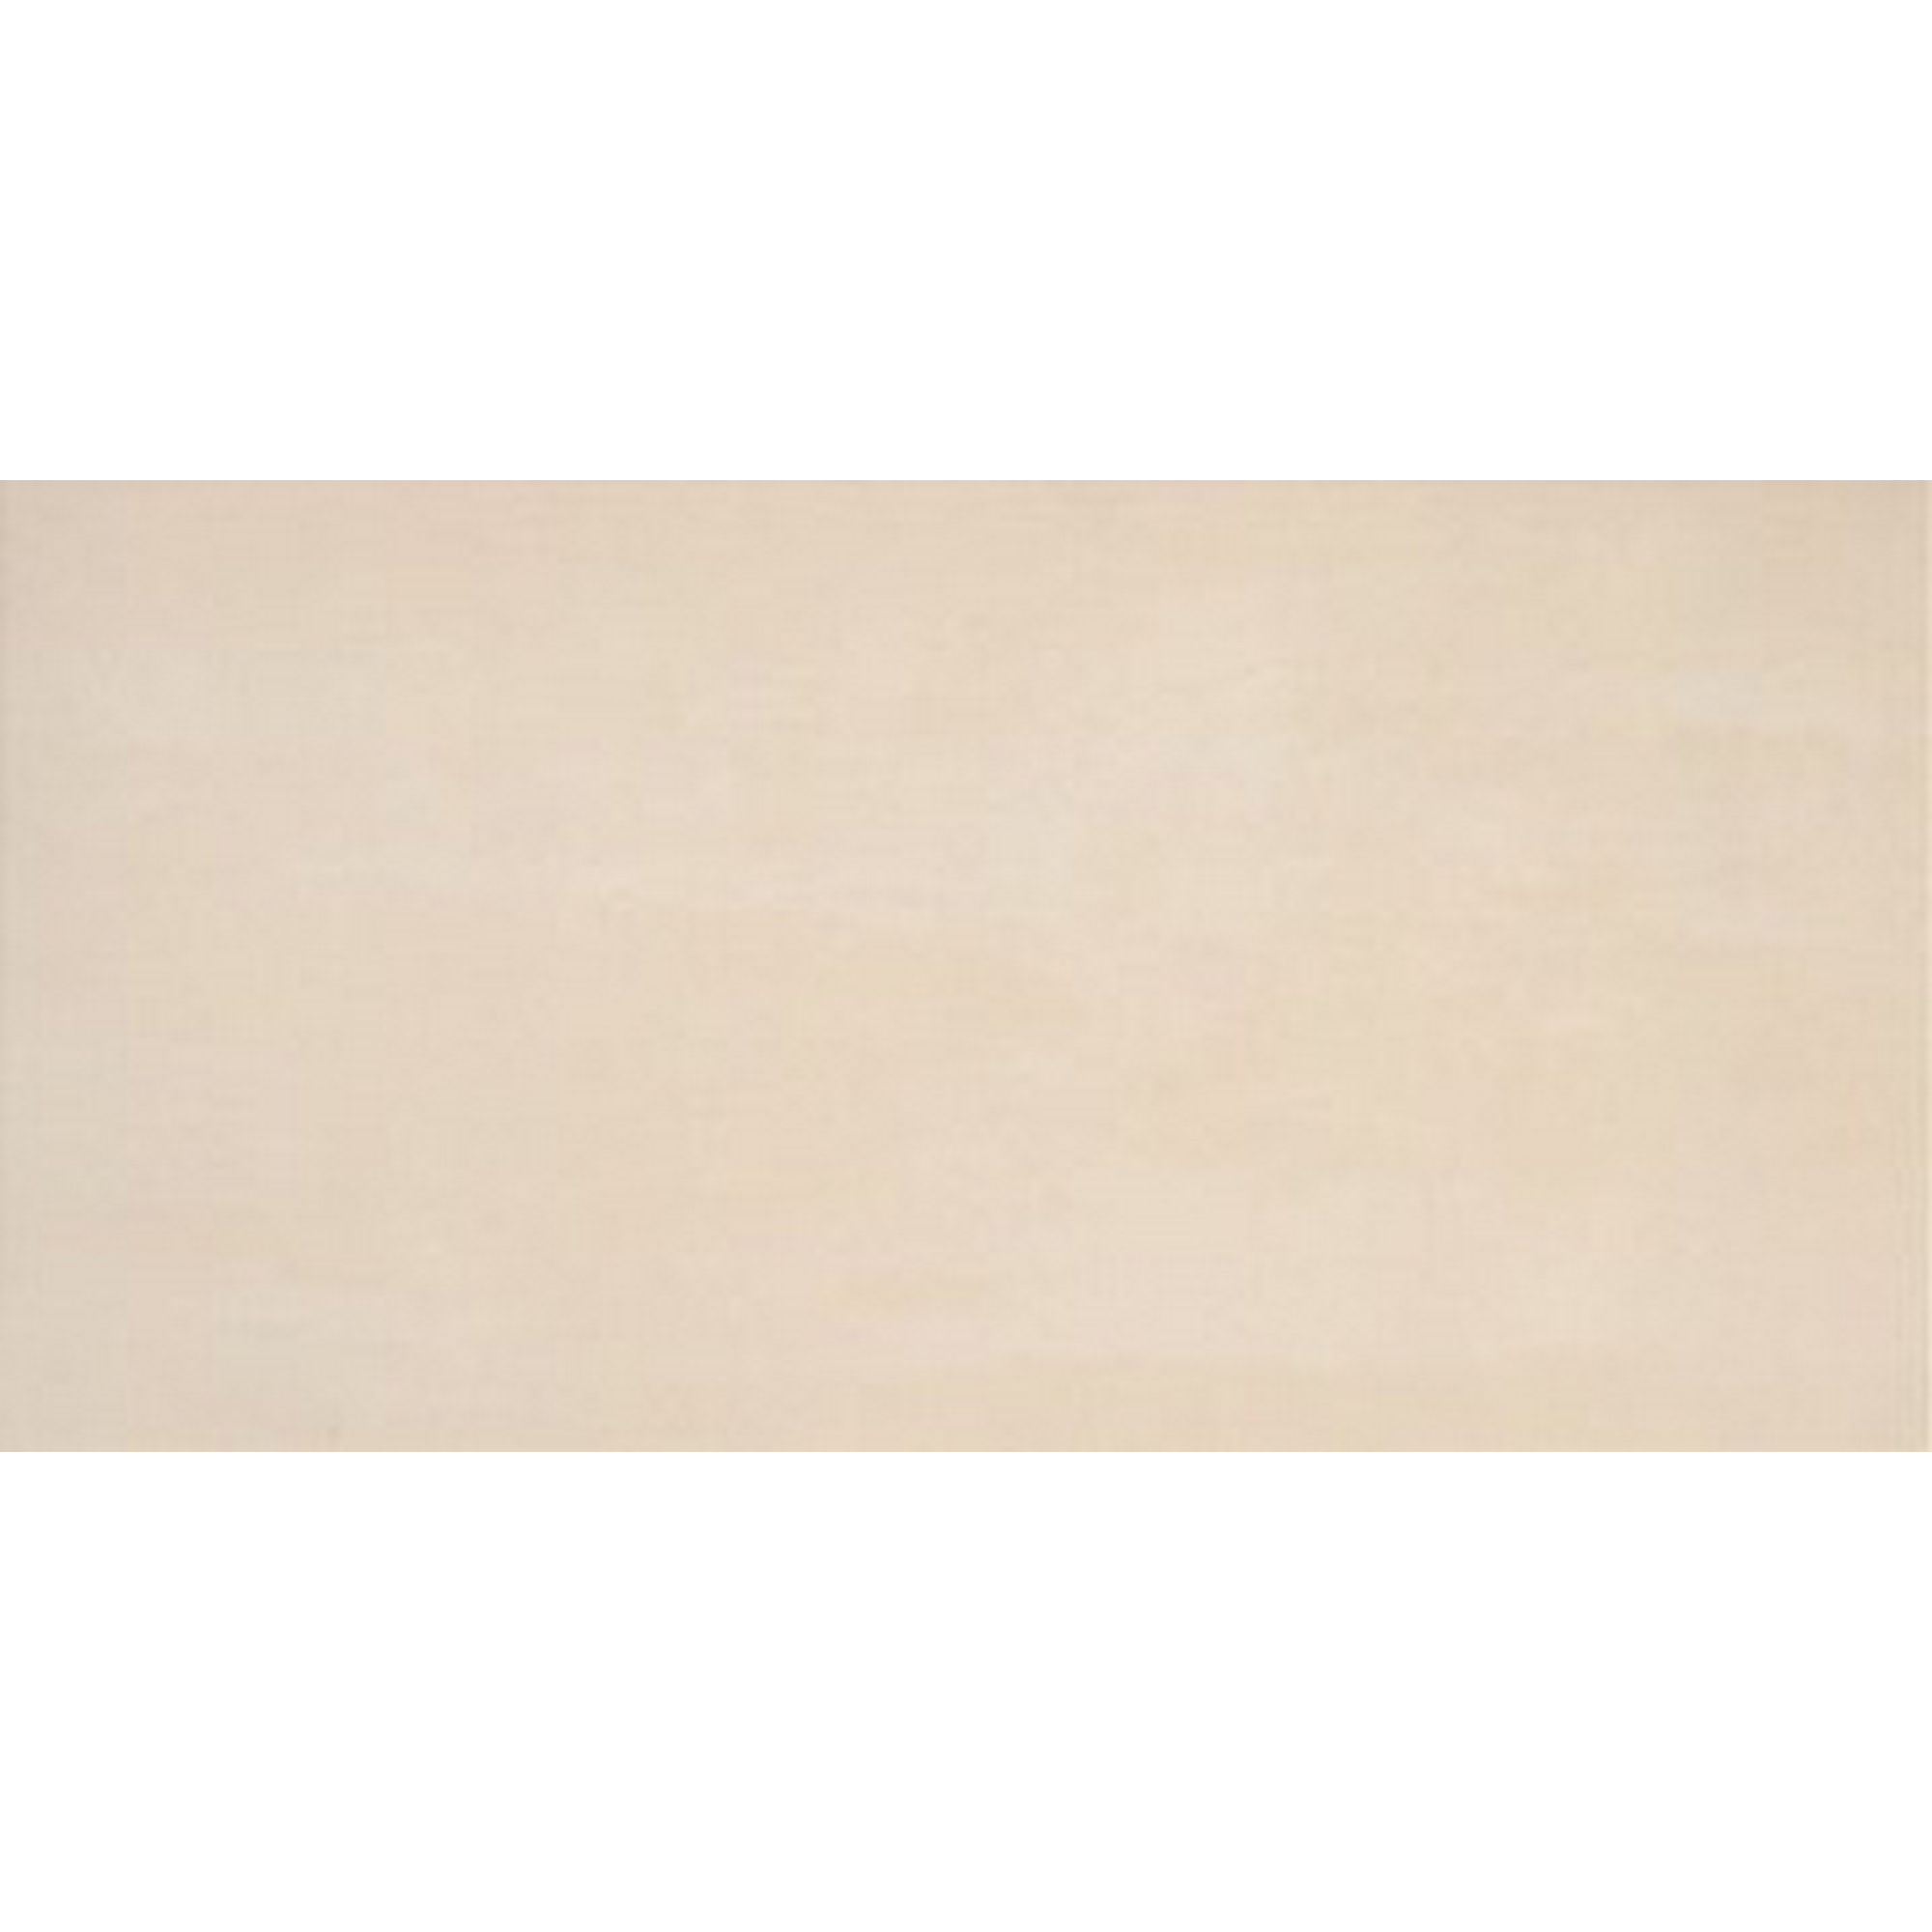 Bodenfliese 'Unit Four' Feinsteinzeug creme 30 x 60 cm + product picture